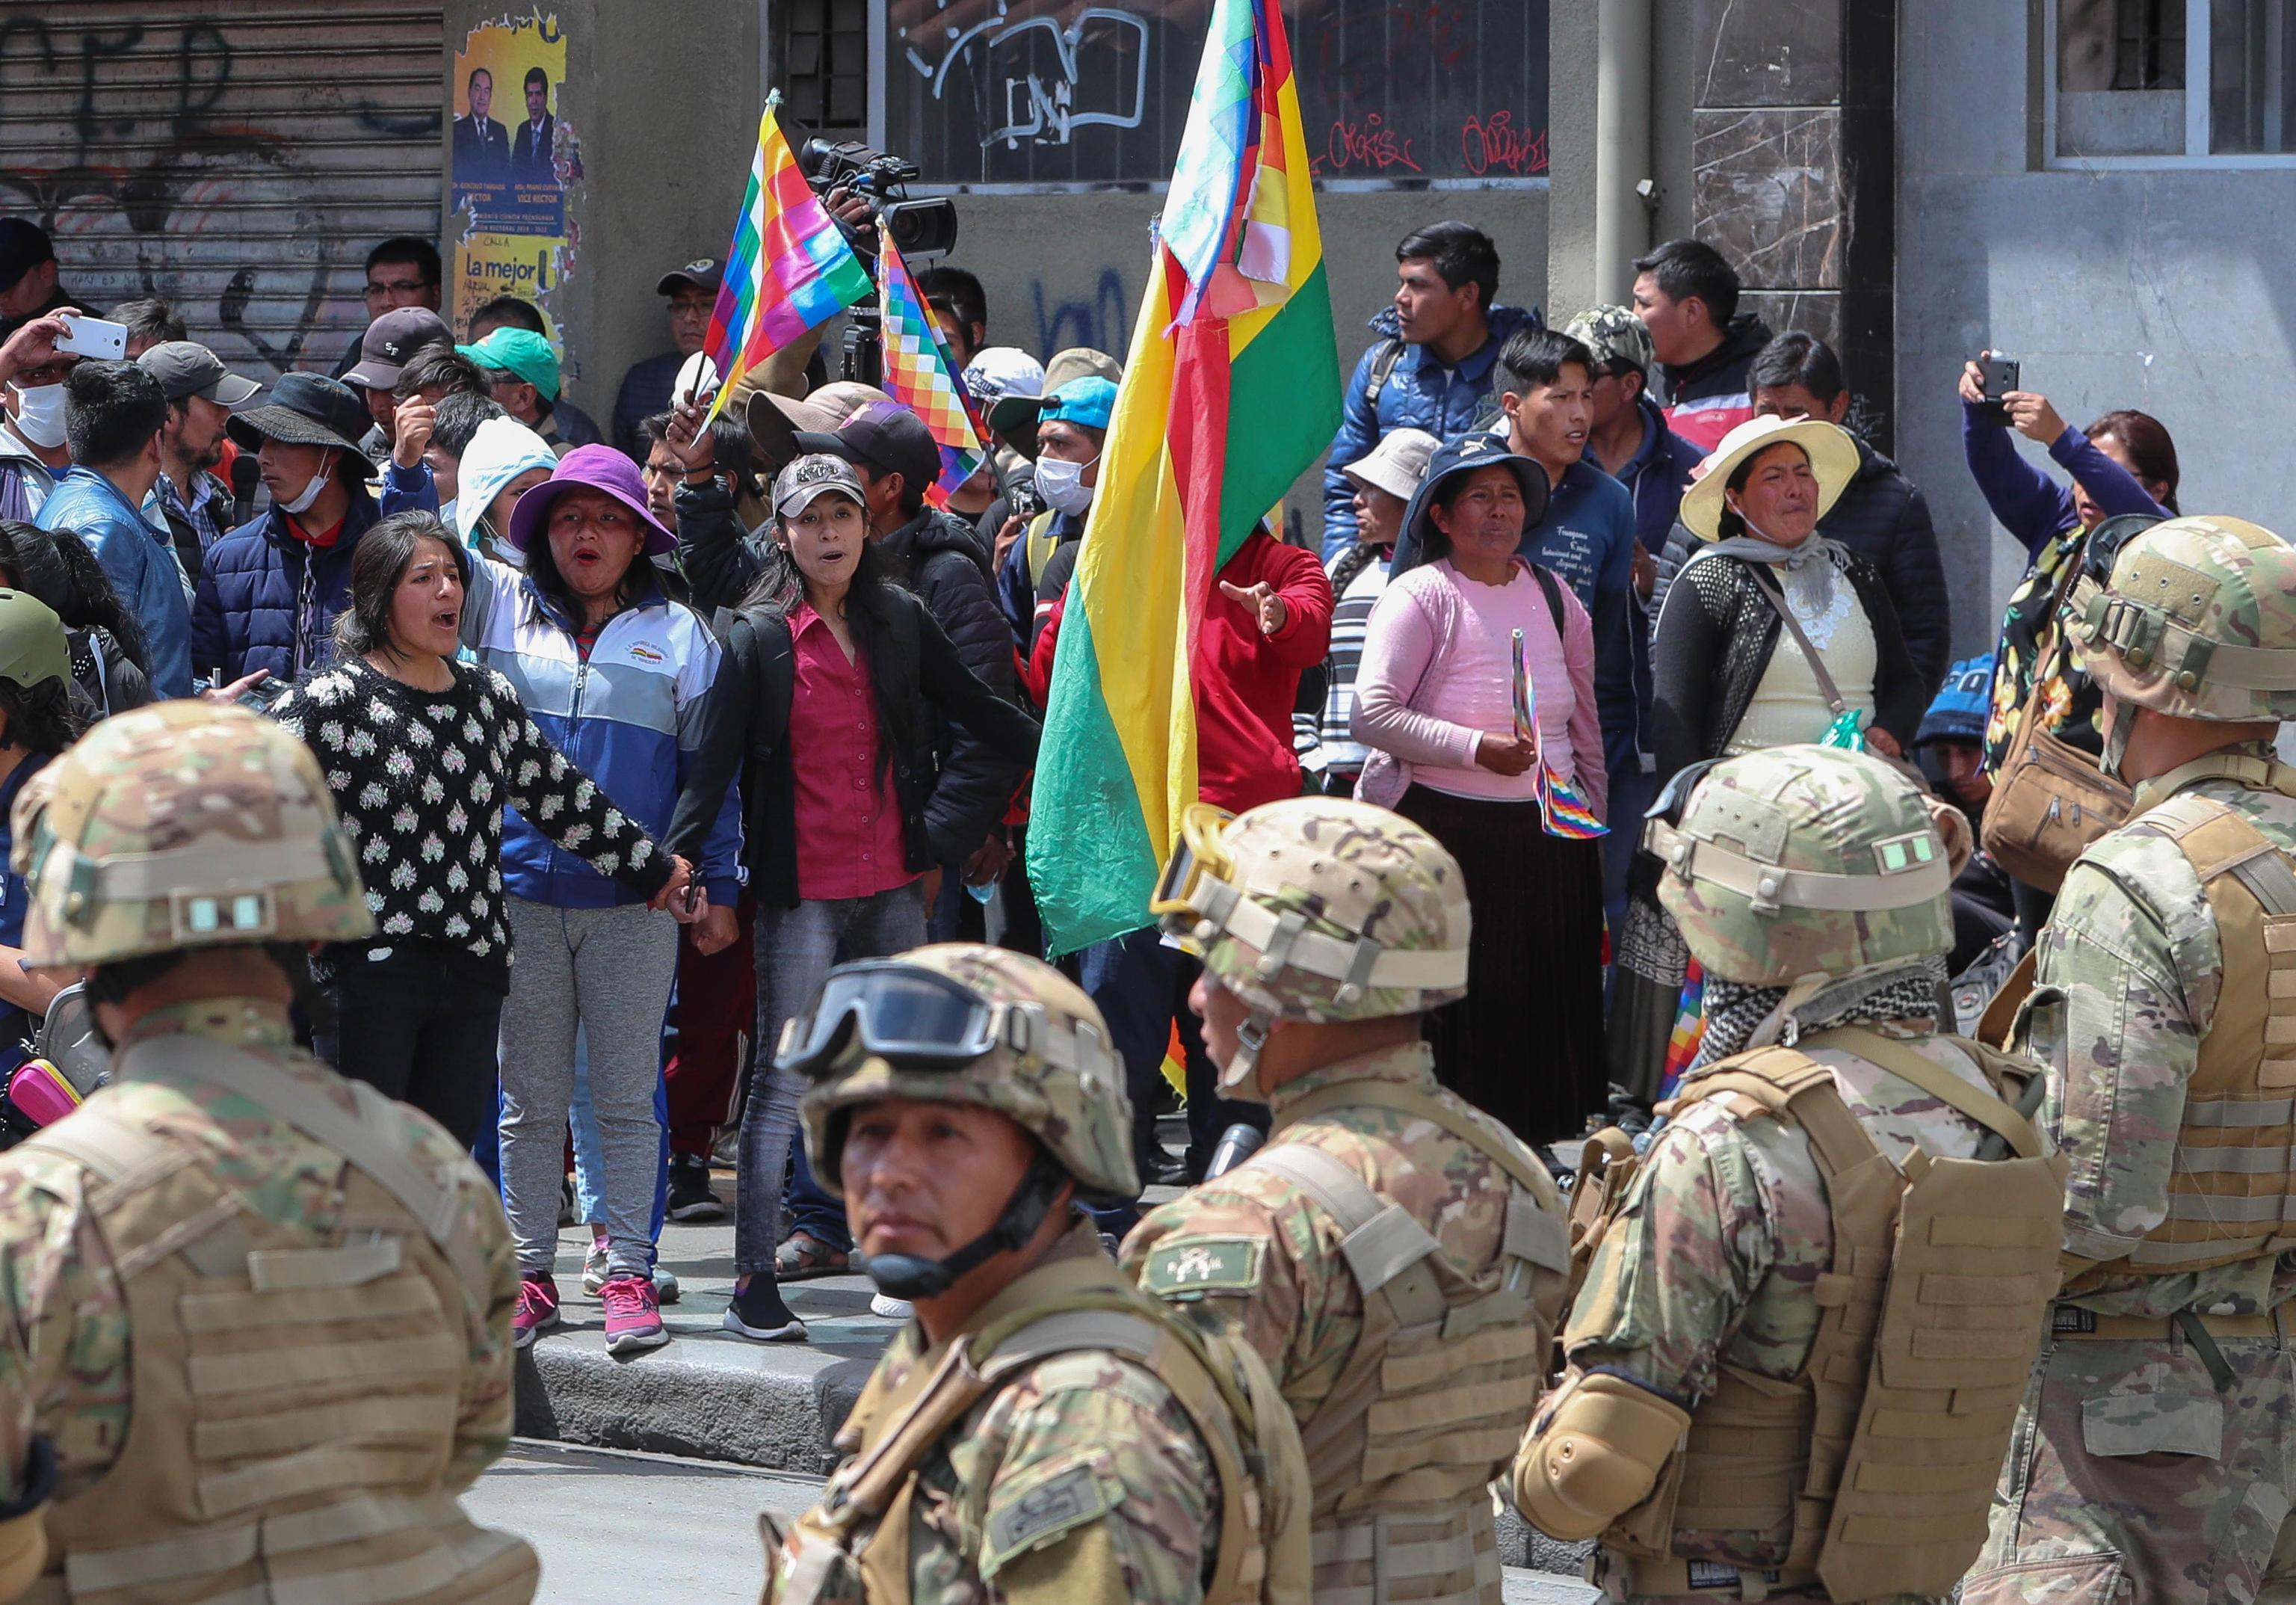 epa08000417 Bolivian military guard around the vicinity of Plaza Murillo while thousands of citizens of El Alto along with supporters of former President Evo Morales march in La Paz, Bolivia 15 November 2019. Bolivia is plunged into a crisis after the elections of October 20, with at first opposition protests against Evo Morales over allegations of fraud to achieve his fourth consecutive term, and now after his resignation Morales supporters protesting against the interim government of Jeanine ÃÃ±ez.  EPA/MartÃ­n Alipaz